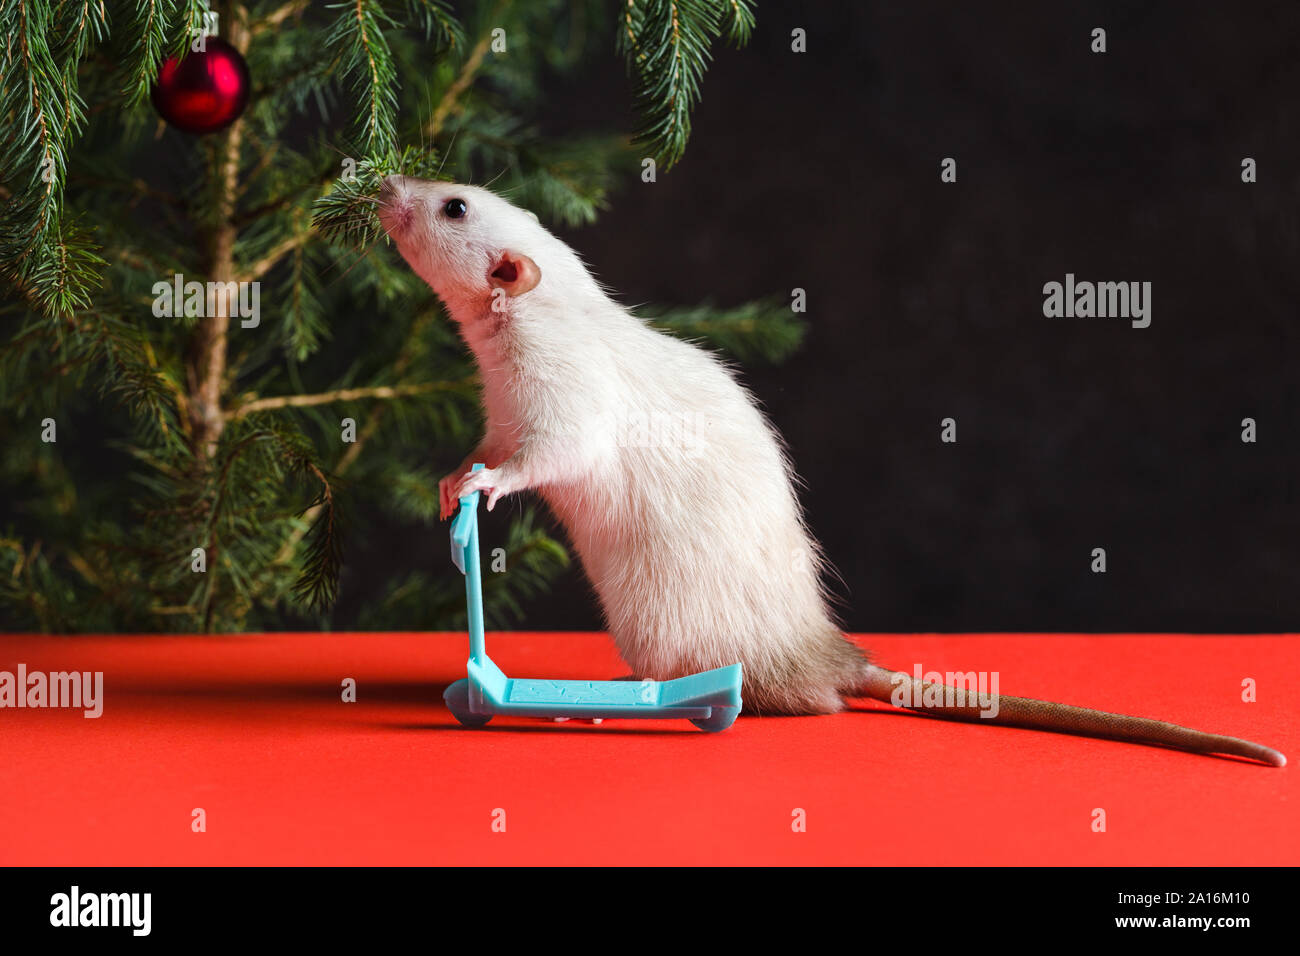 Happy New Year 2020. Christmas composition with a real rat, symbol of the year. Rat on a mini scooter near a Christmas tree with toys Stock Photo